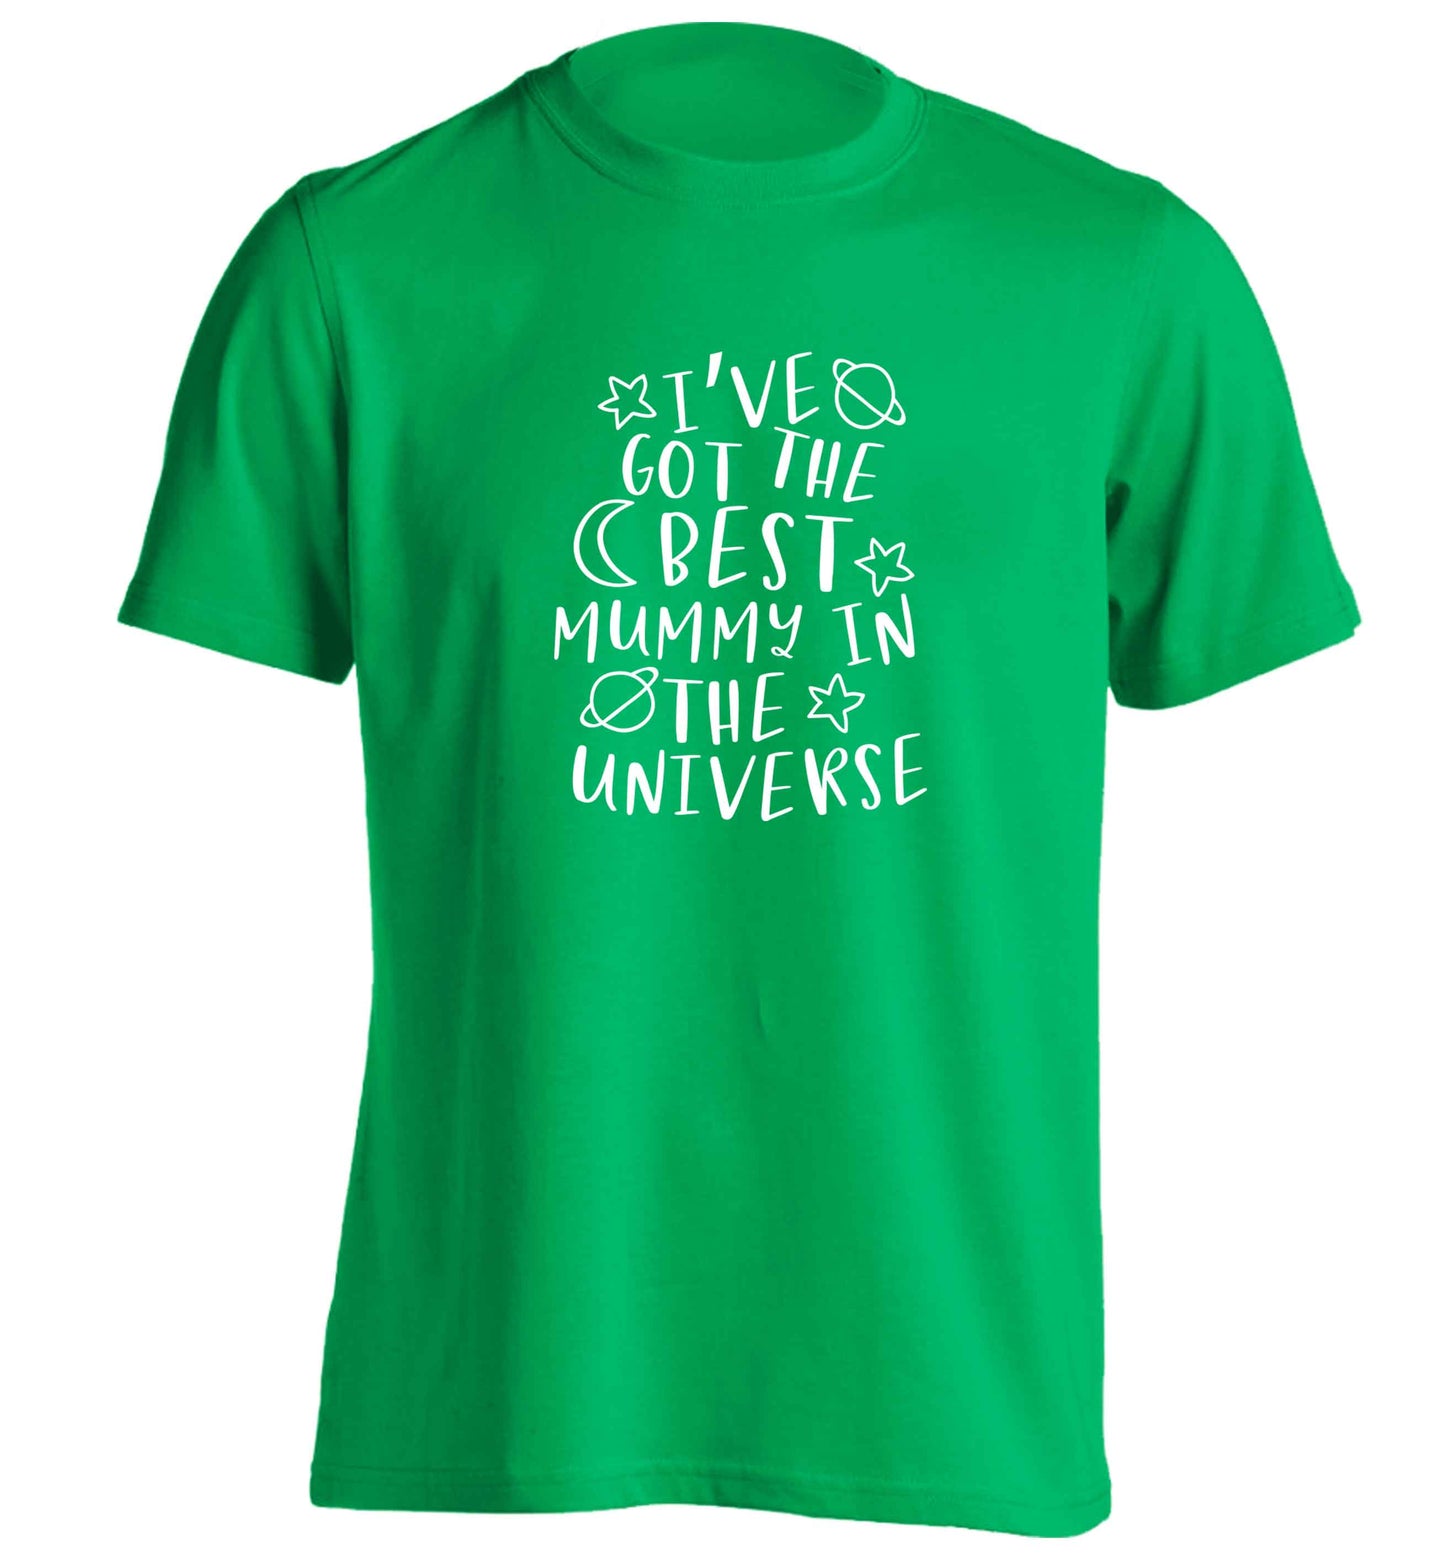 I've got the best mummy in the universe adults unisex green Tshirt 2XL